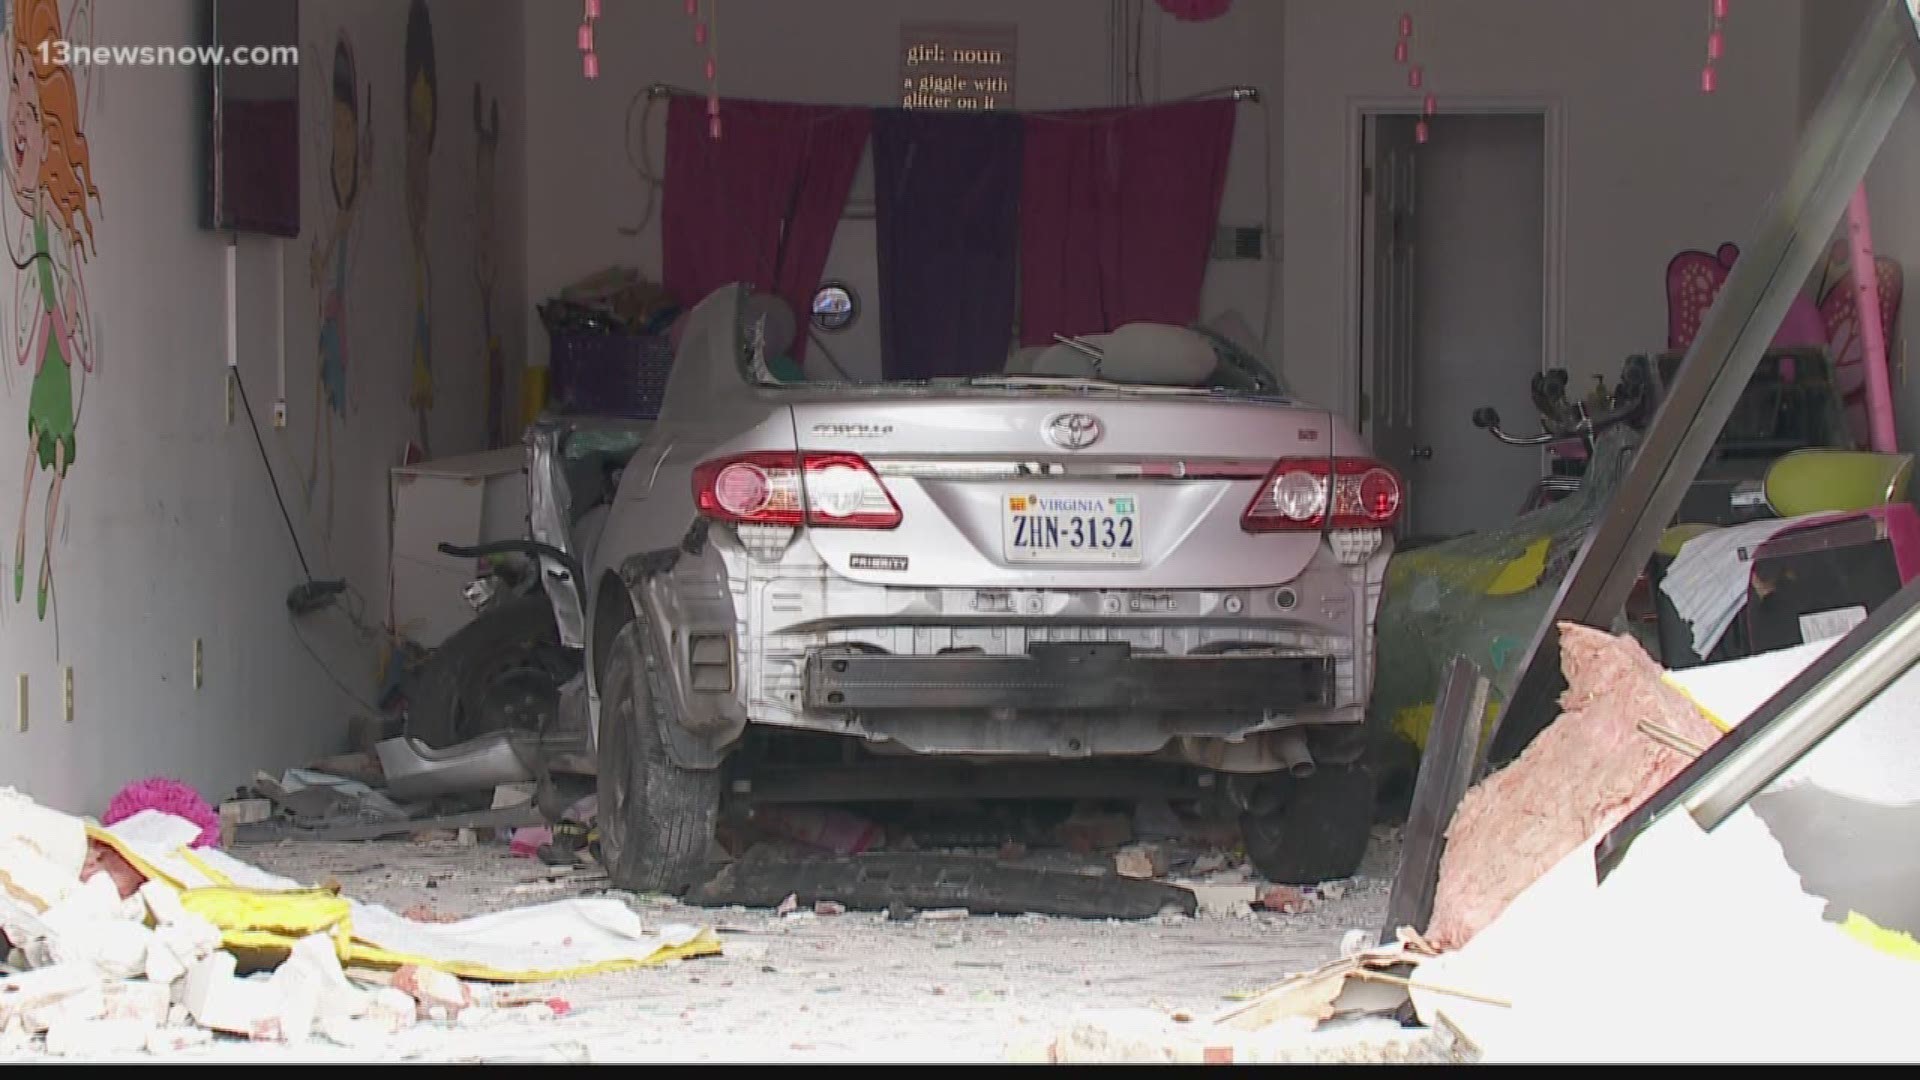 A Virginia Beach business, centered around children, was destroyed this afternoon when a woman drove a car through the front door.